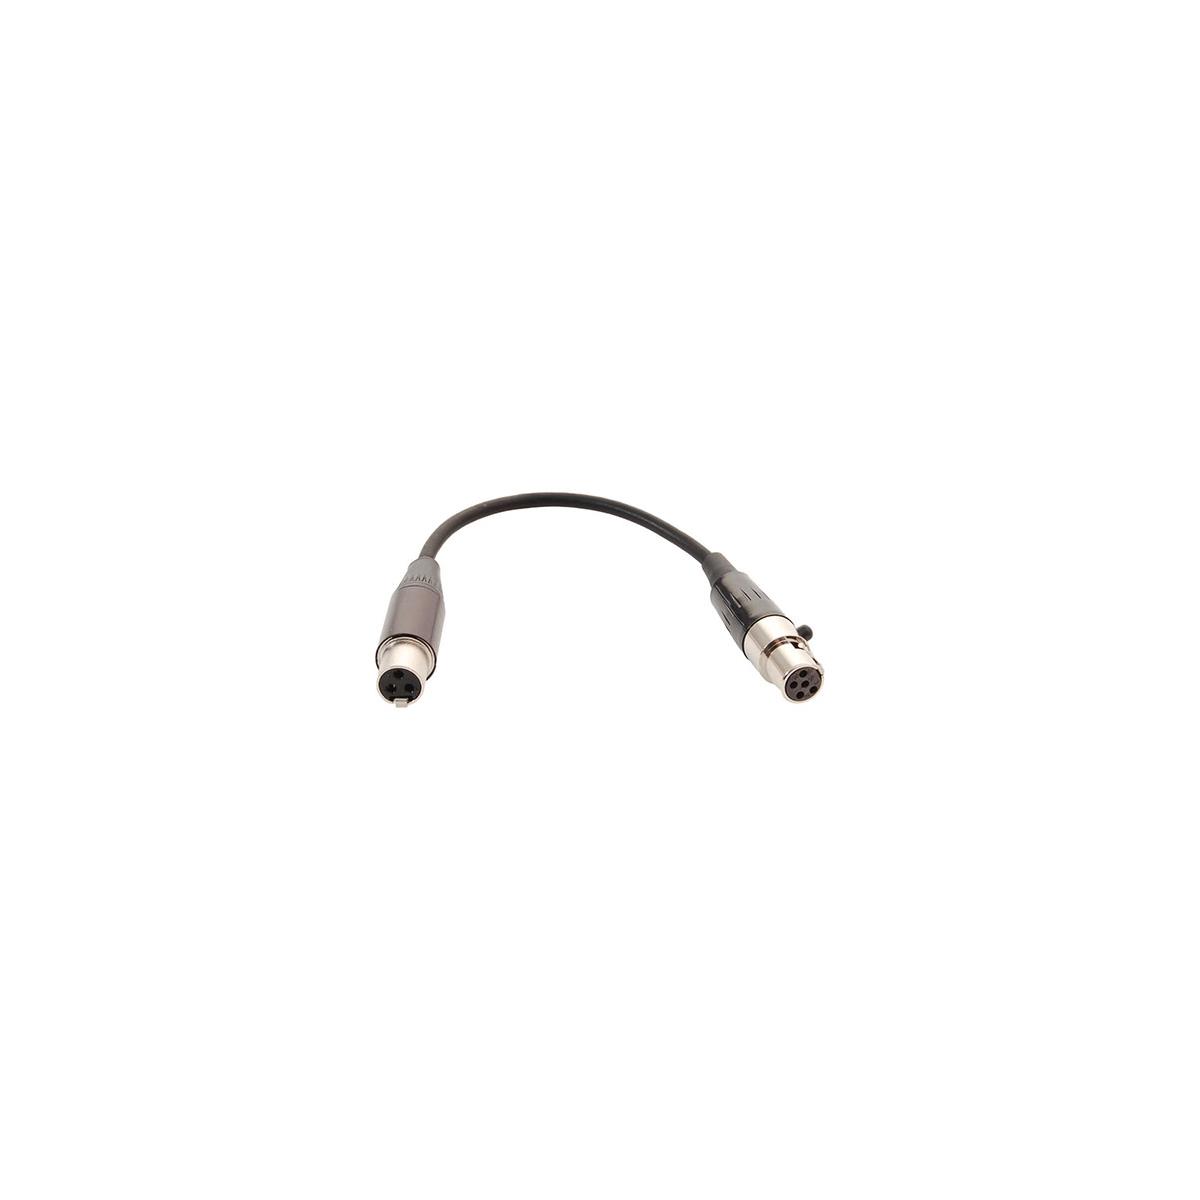 Image of Ambient Recording UMP Audio Output Cable to Shure Transmitter